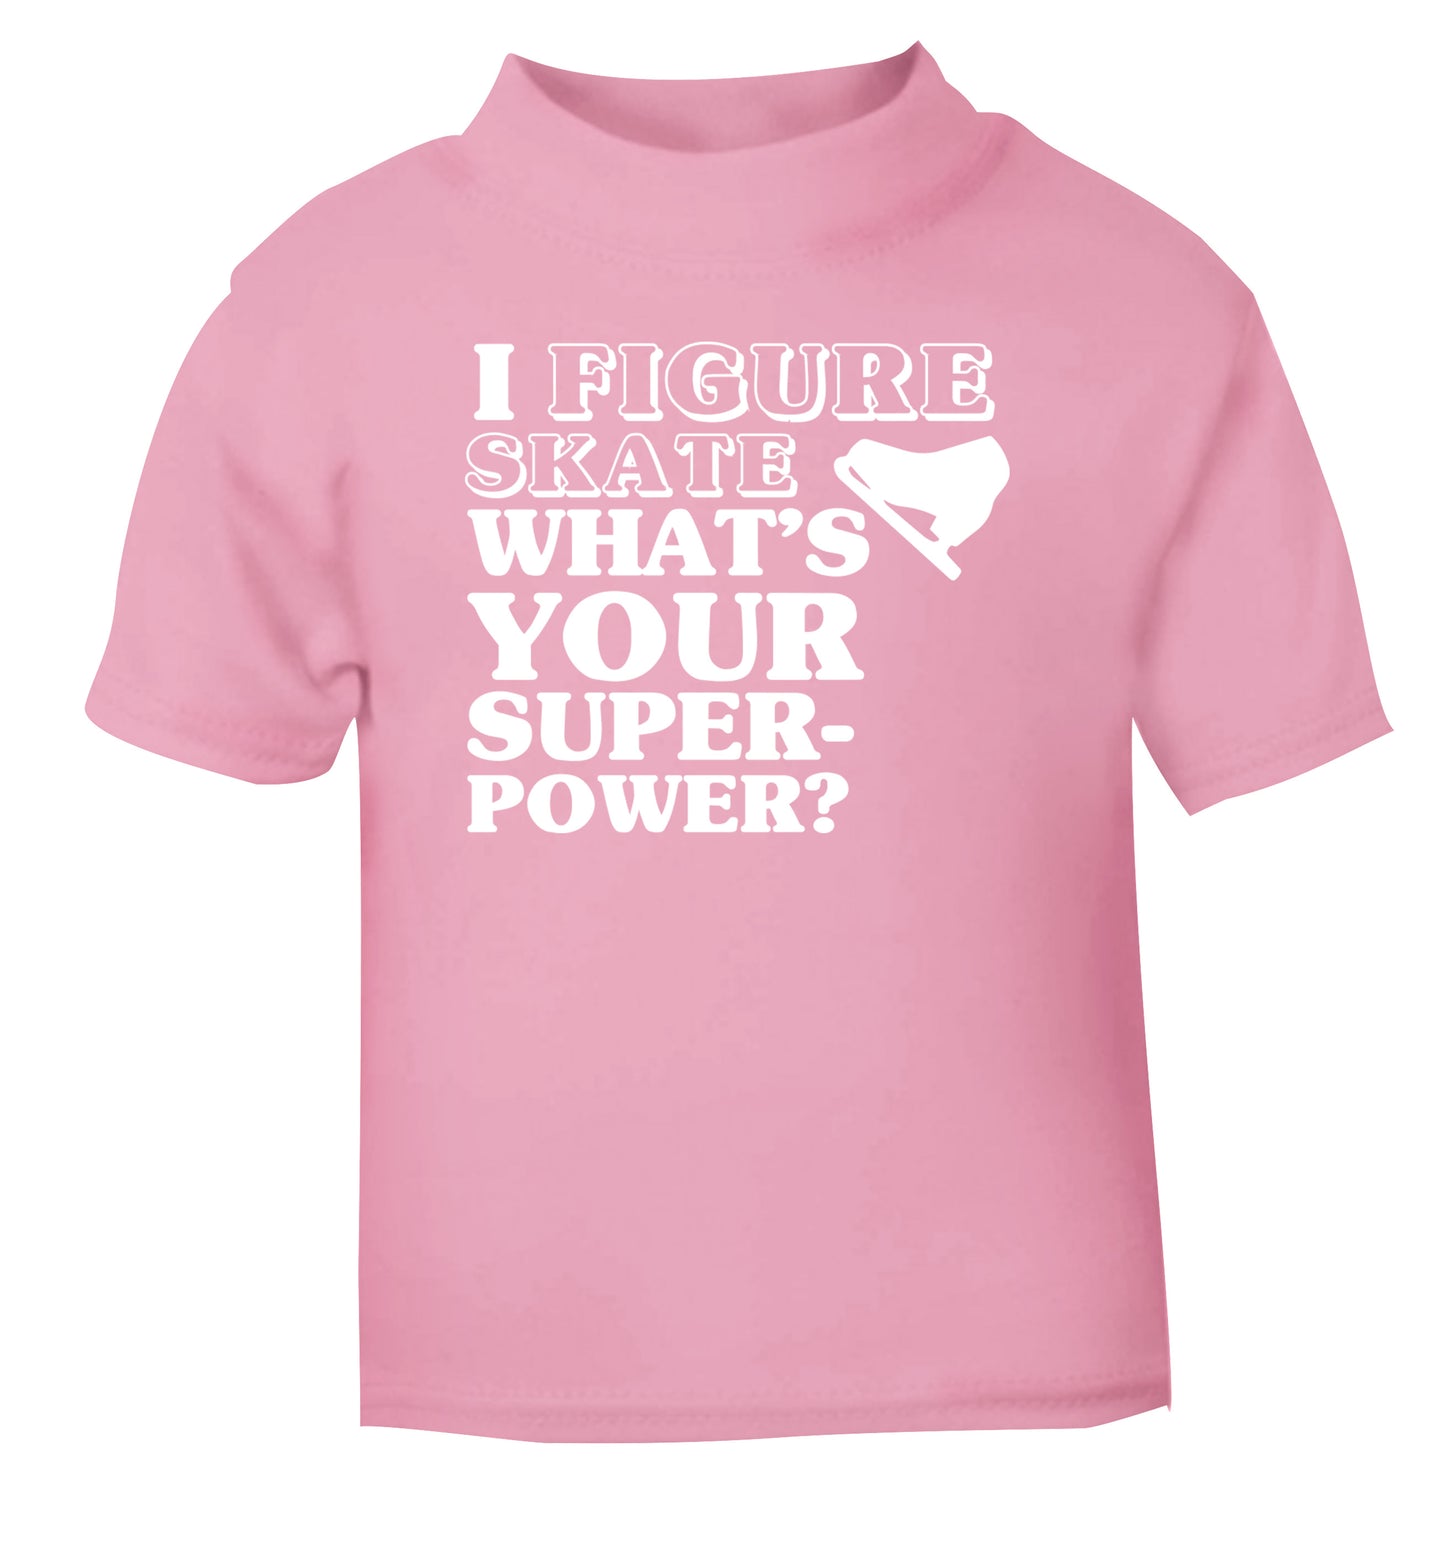 I figure skate what's your superpower? light pink Baby Toddler Tshirt 2 Years